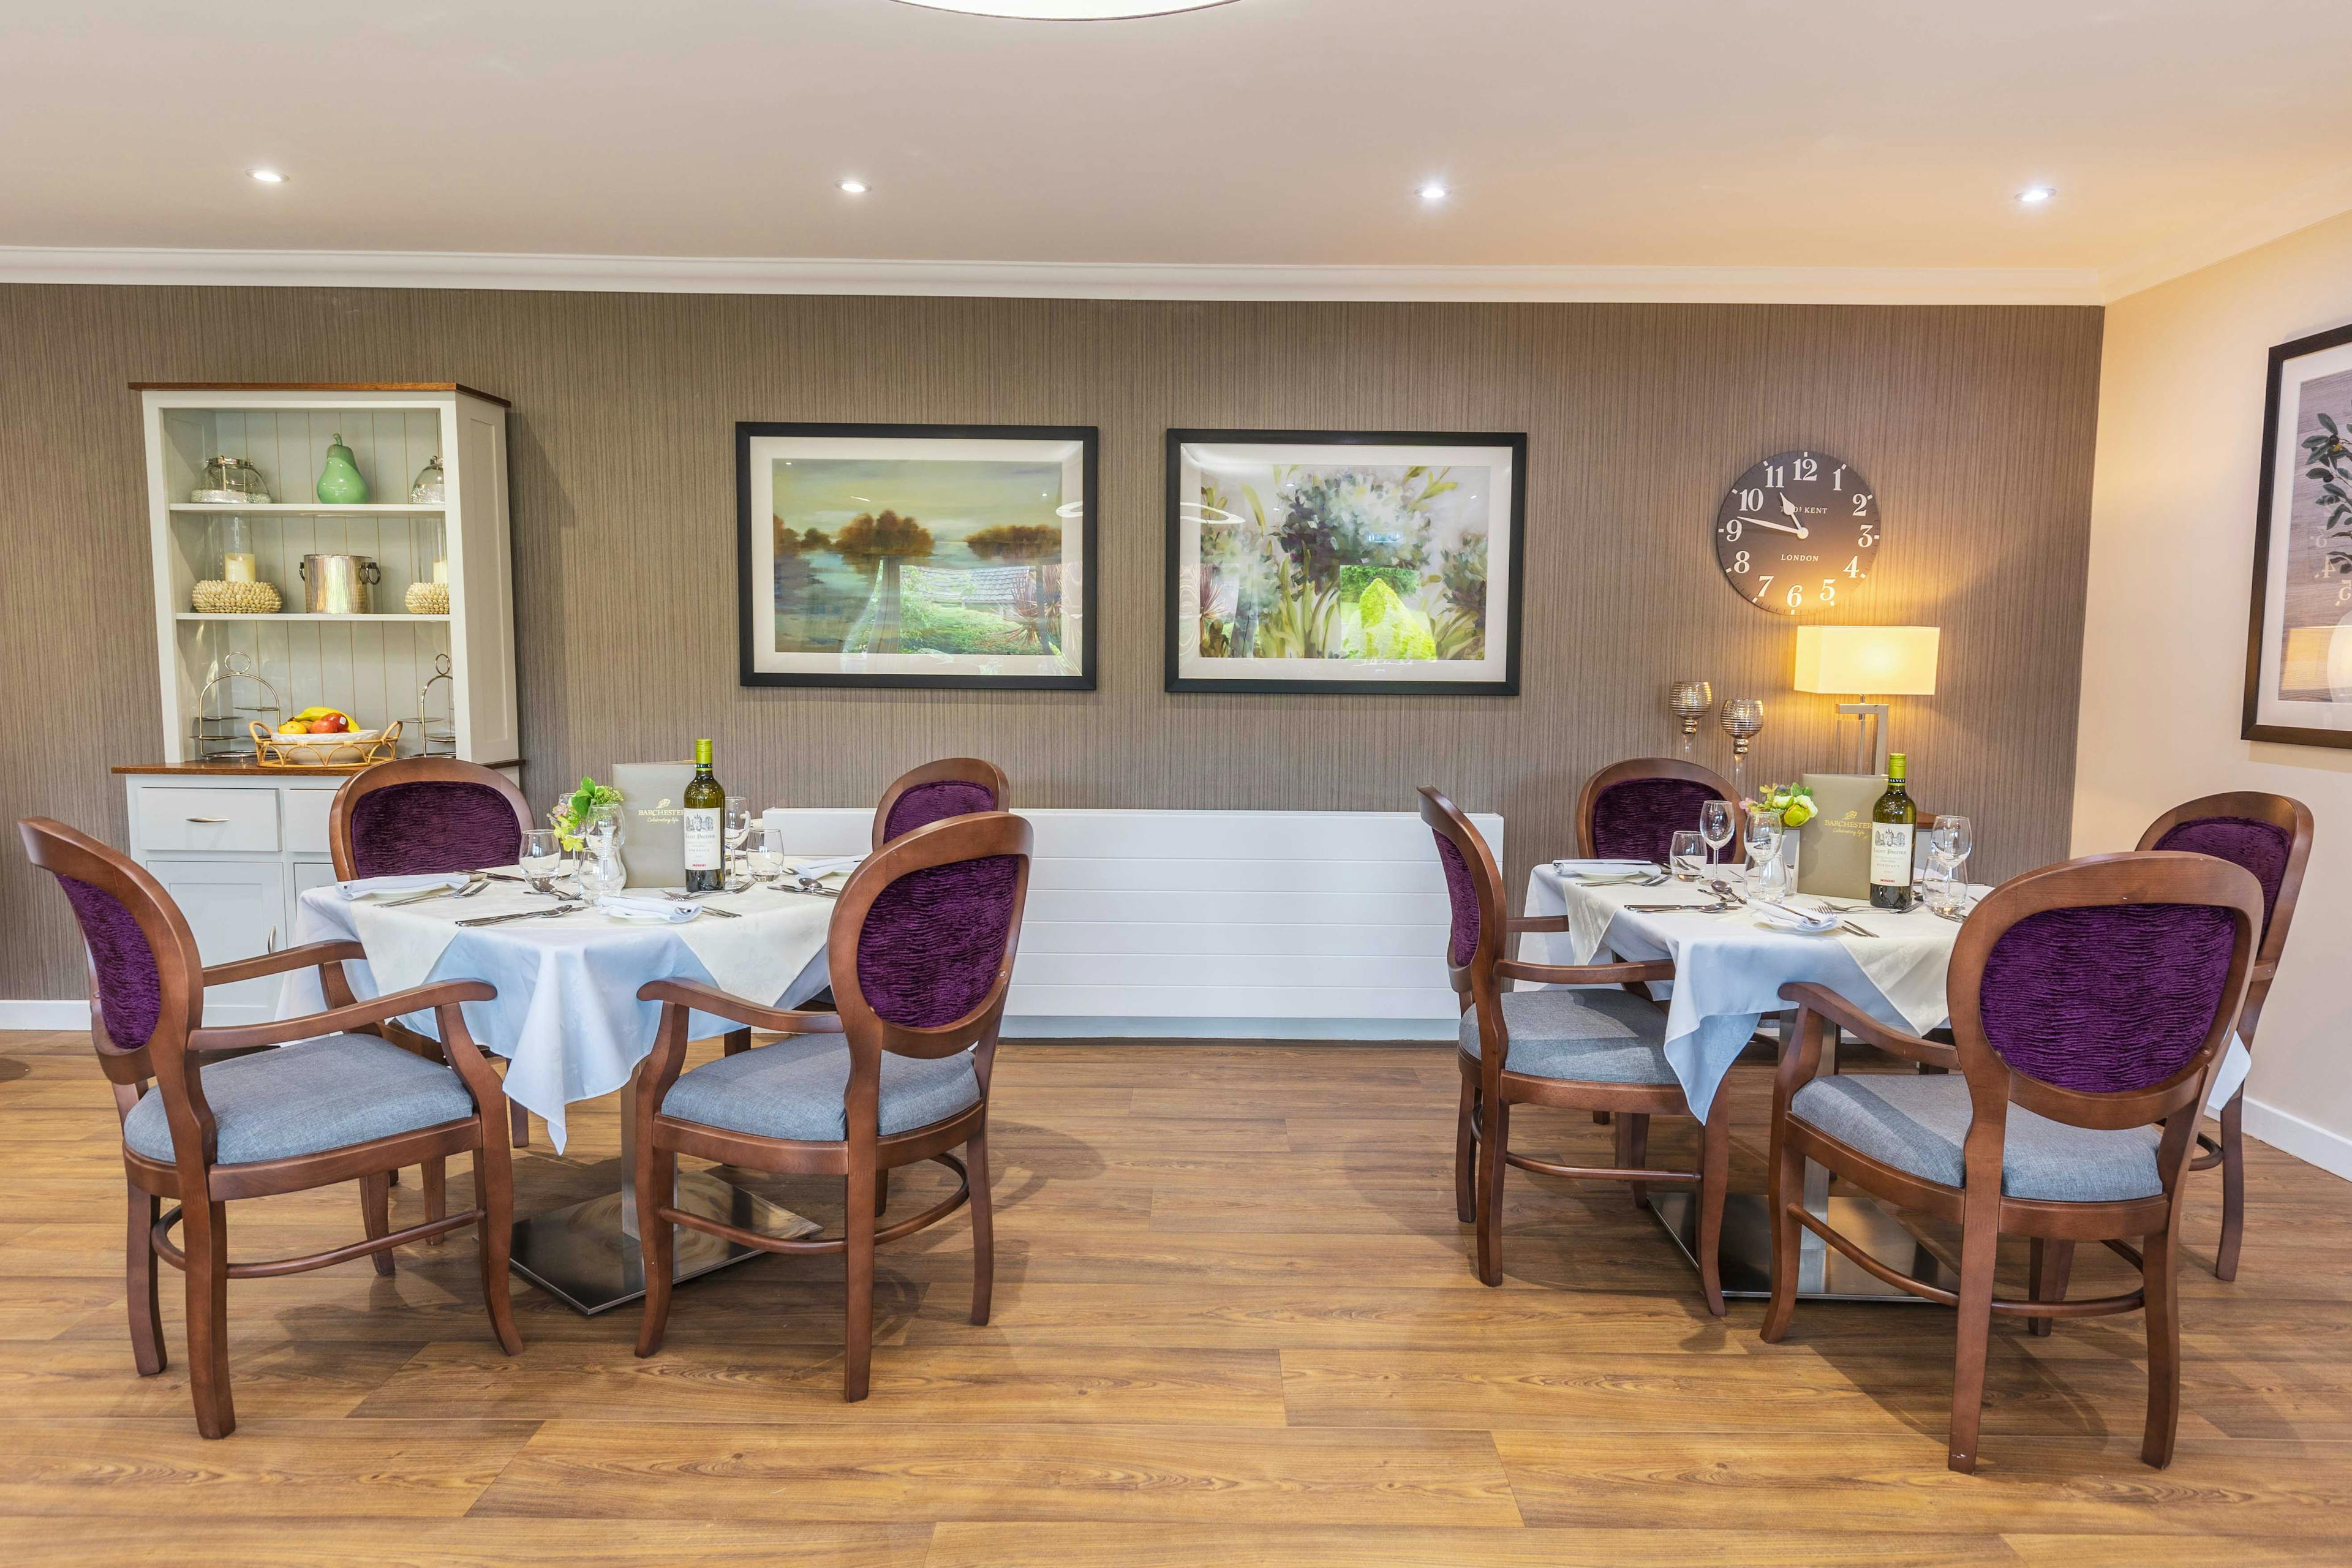 Dining Room at Kirkburn Court Care Home in Peterhead, Aberdeenshire